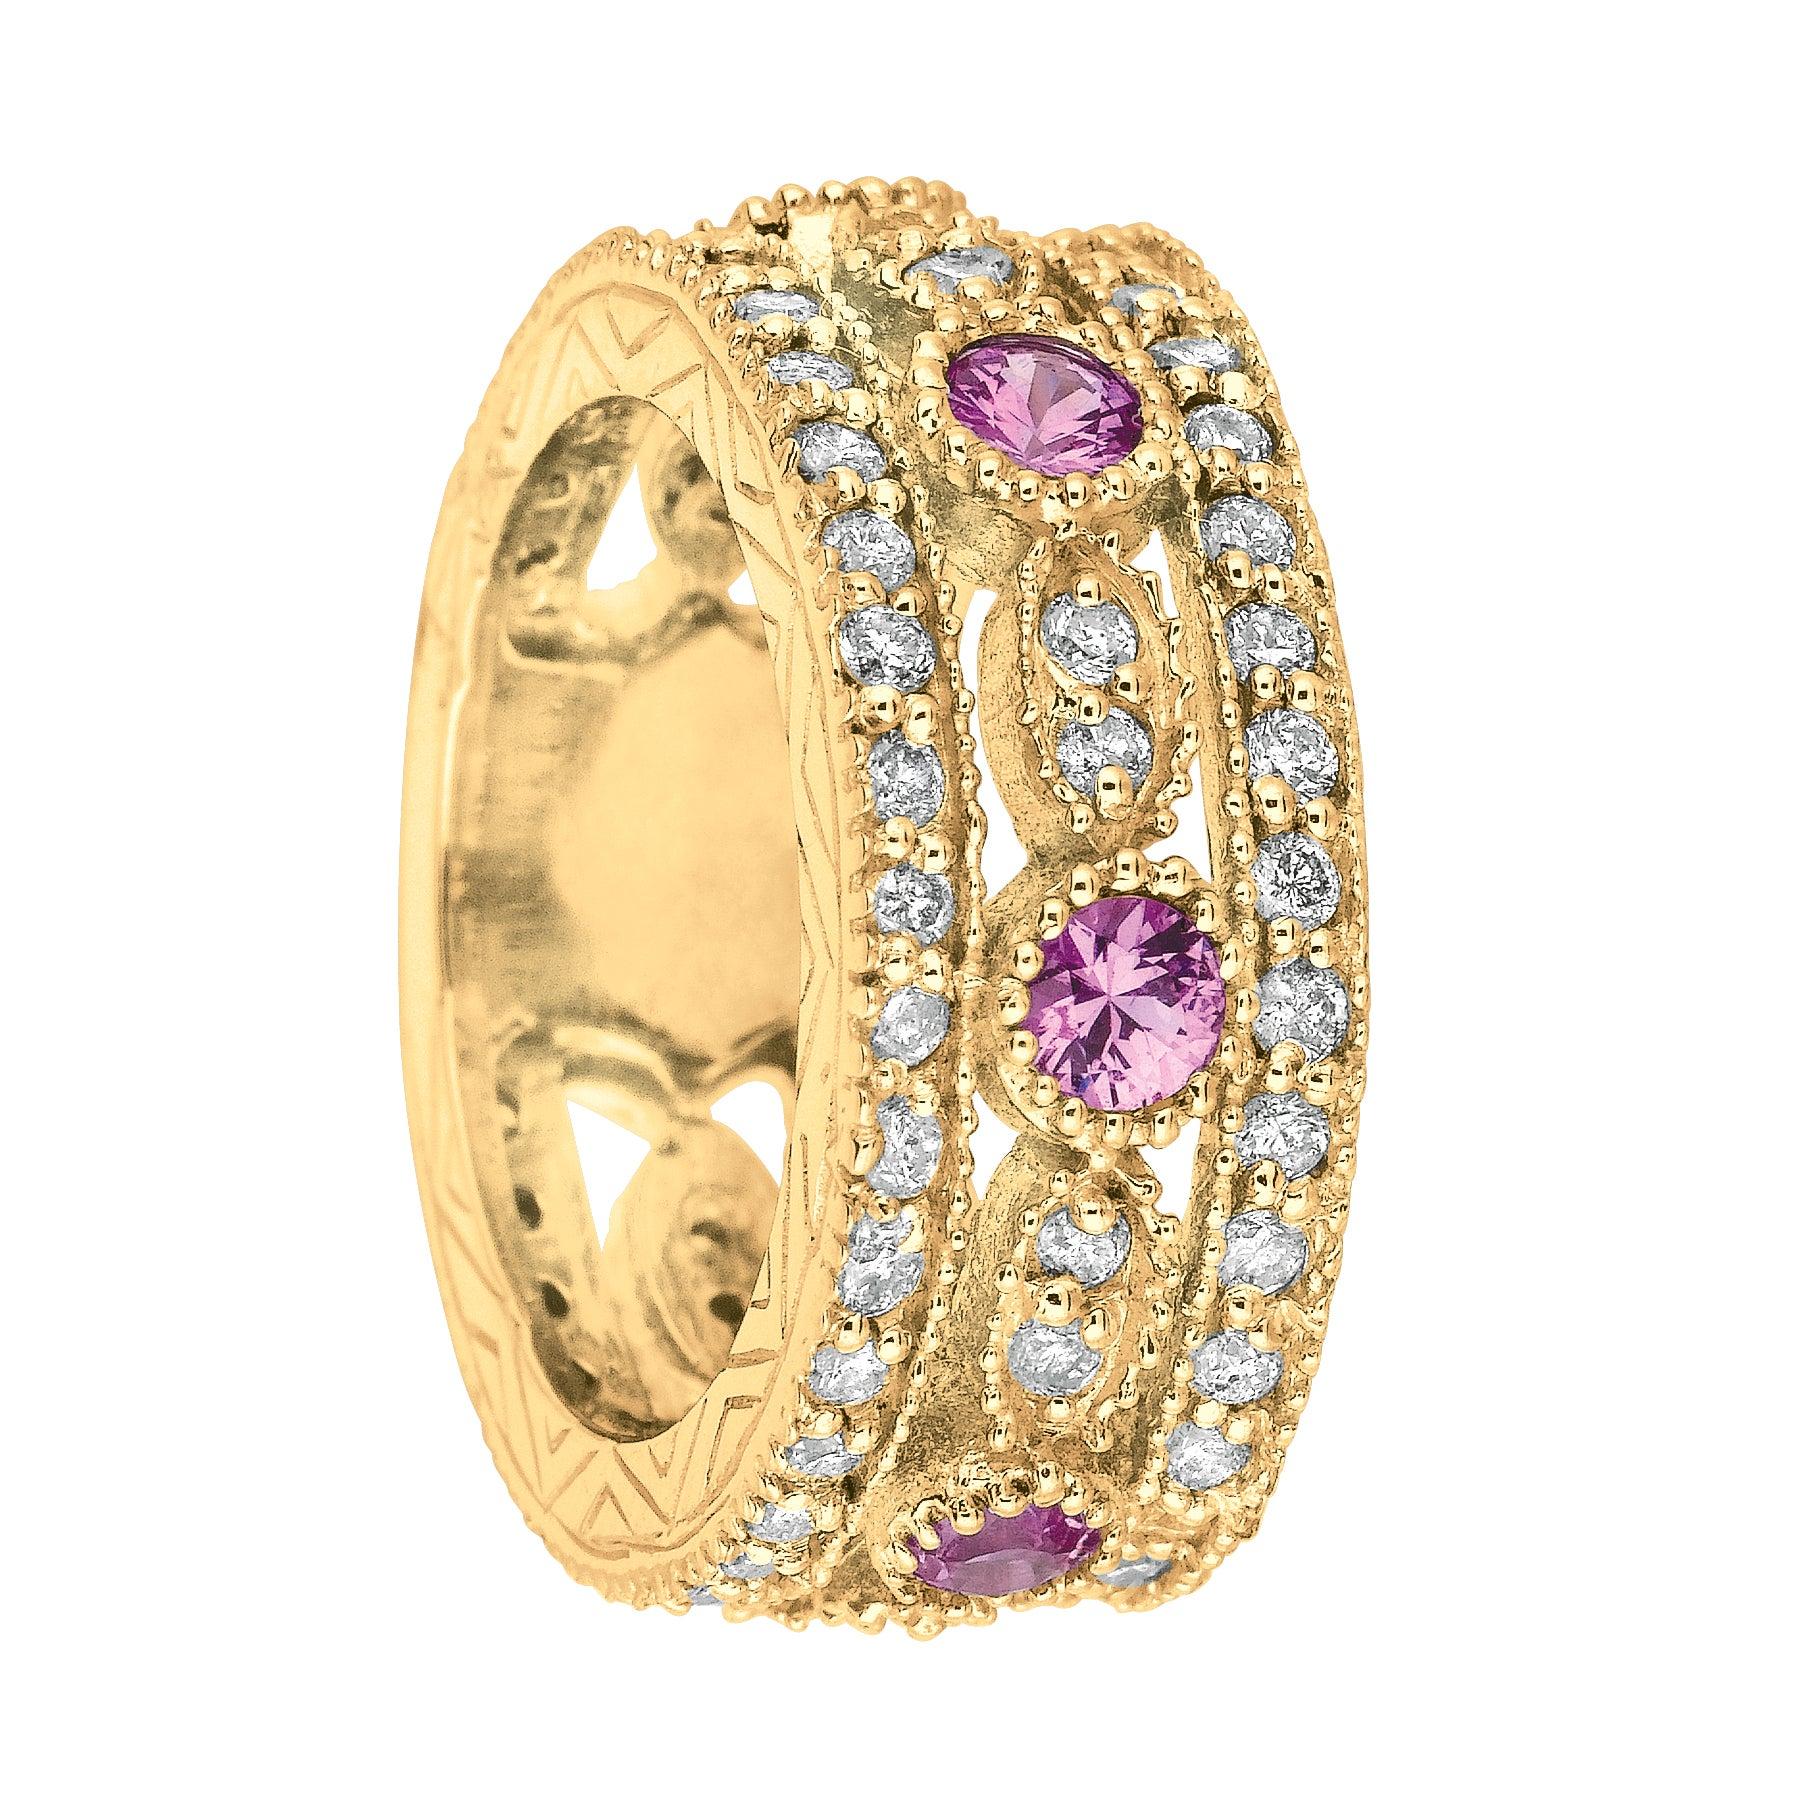 For Sale:  2.14 Carat Natural Pink Sapphire and Diamond Eternity Ring 14 Karat Yellow Gold 2